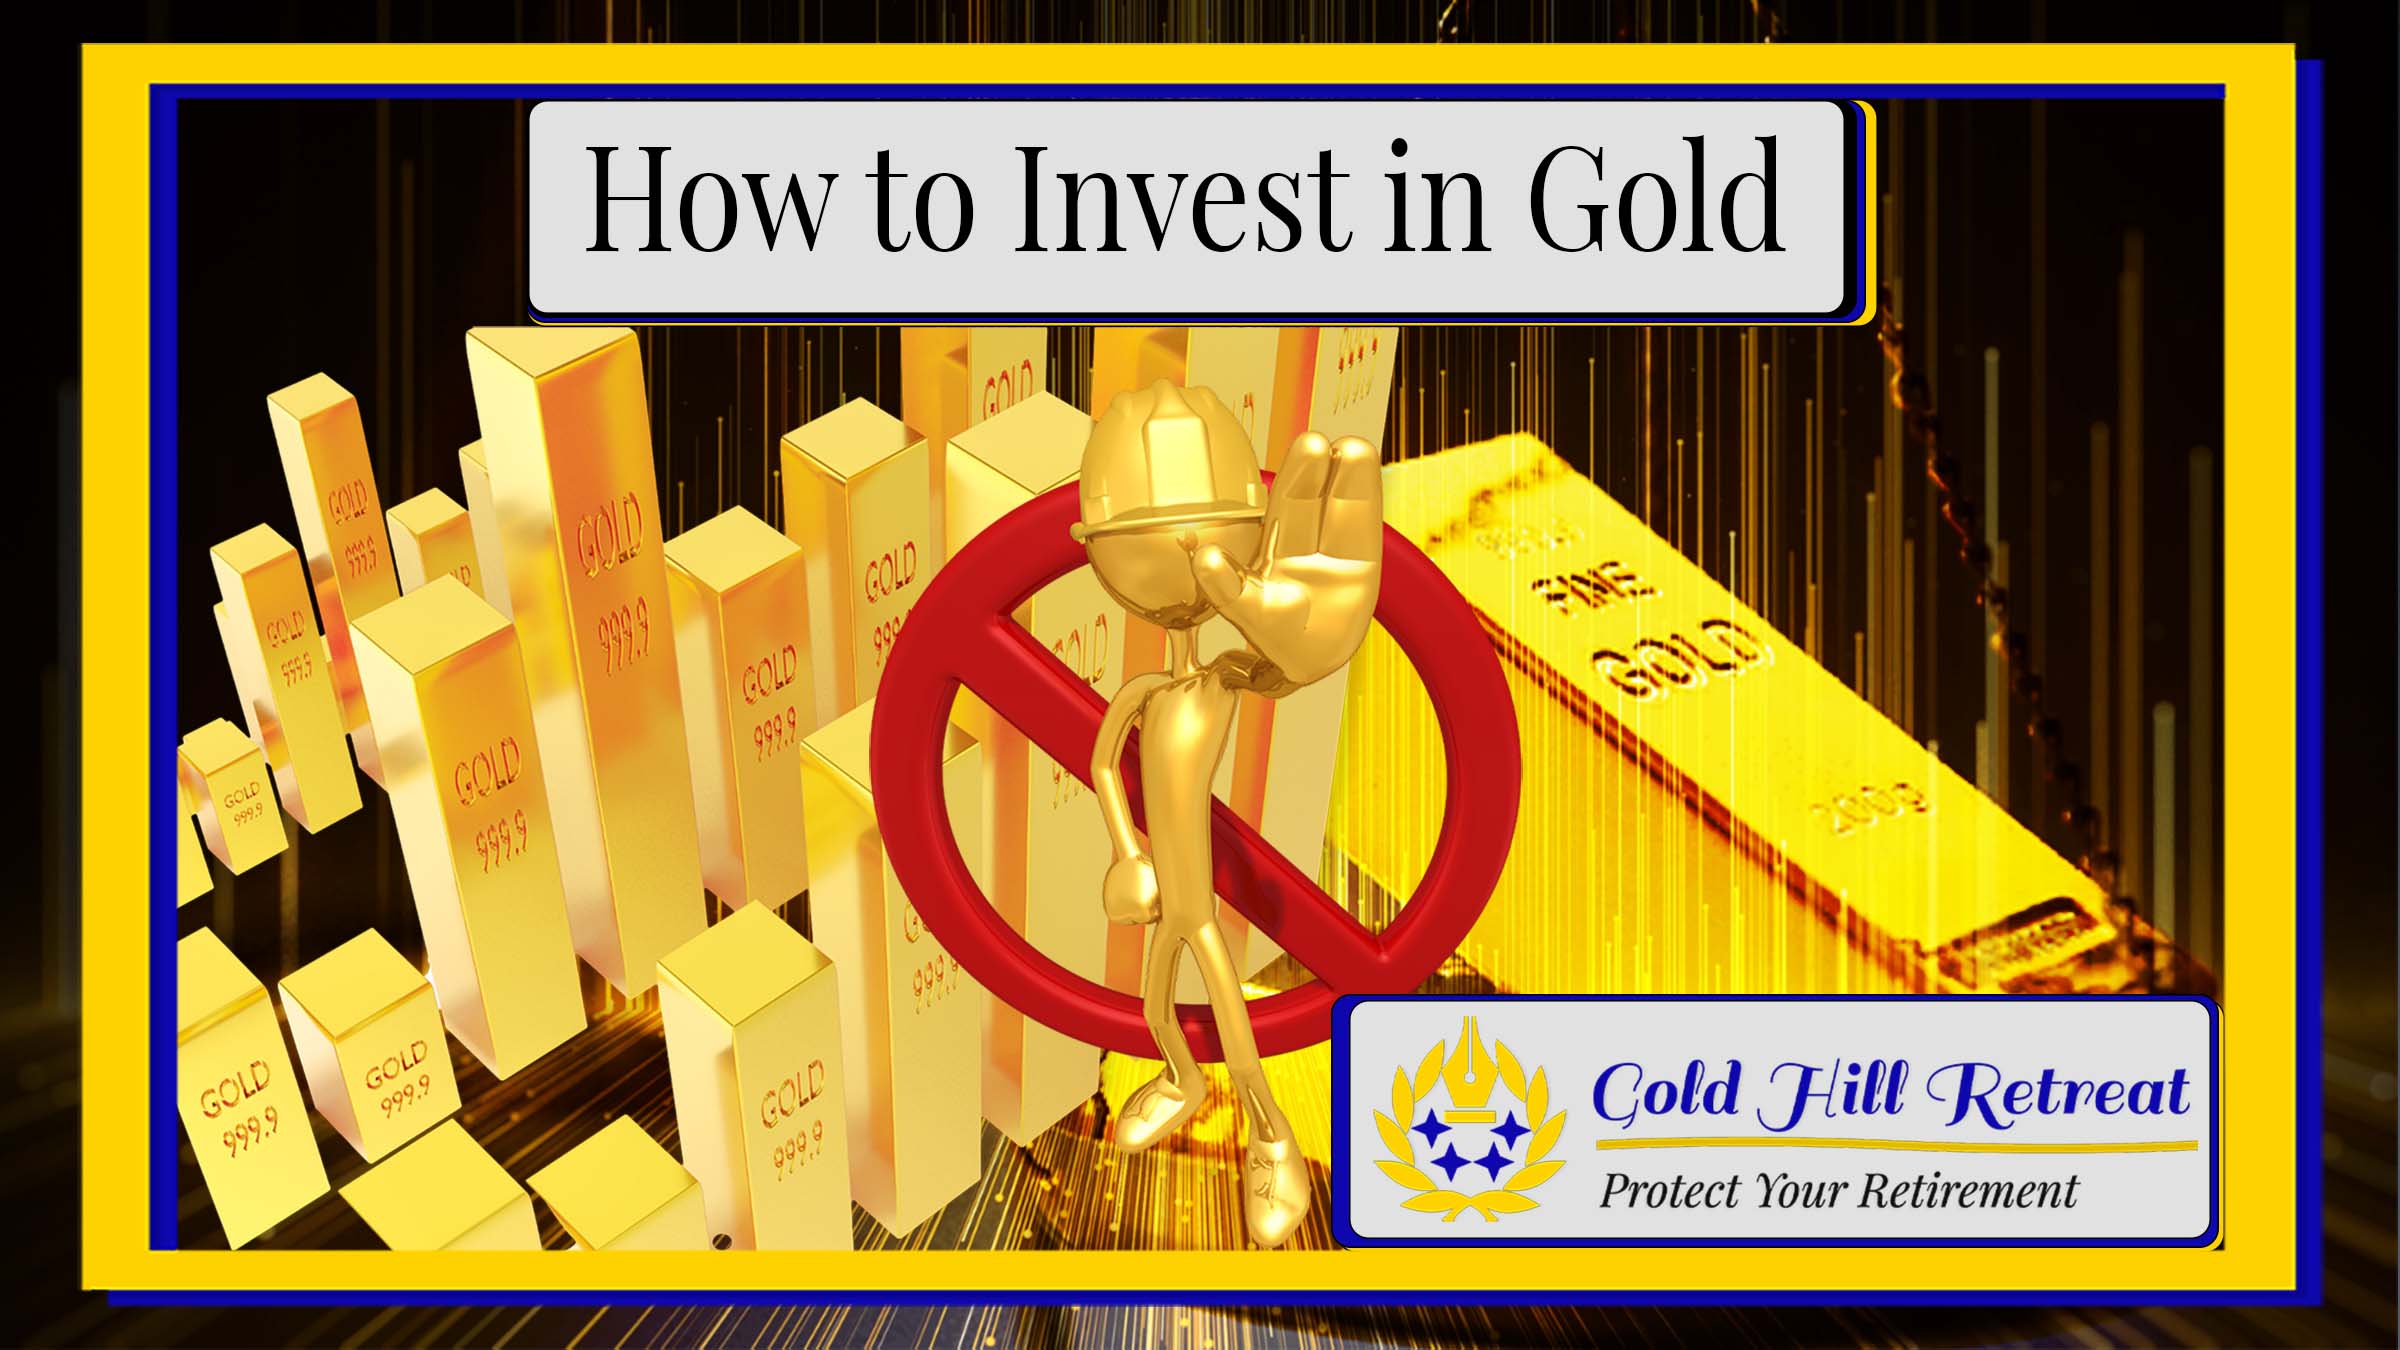 Gold: Good For Your Retirement Savings, But Is It A Good Idea To Invest In Gold Right Now?